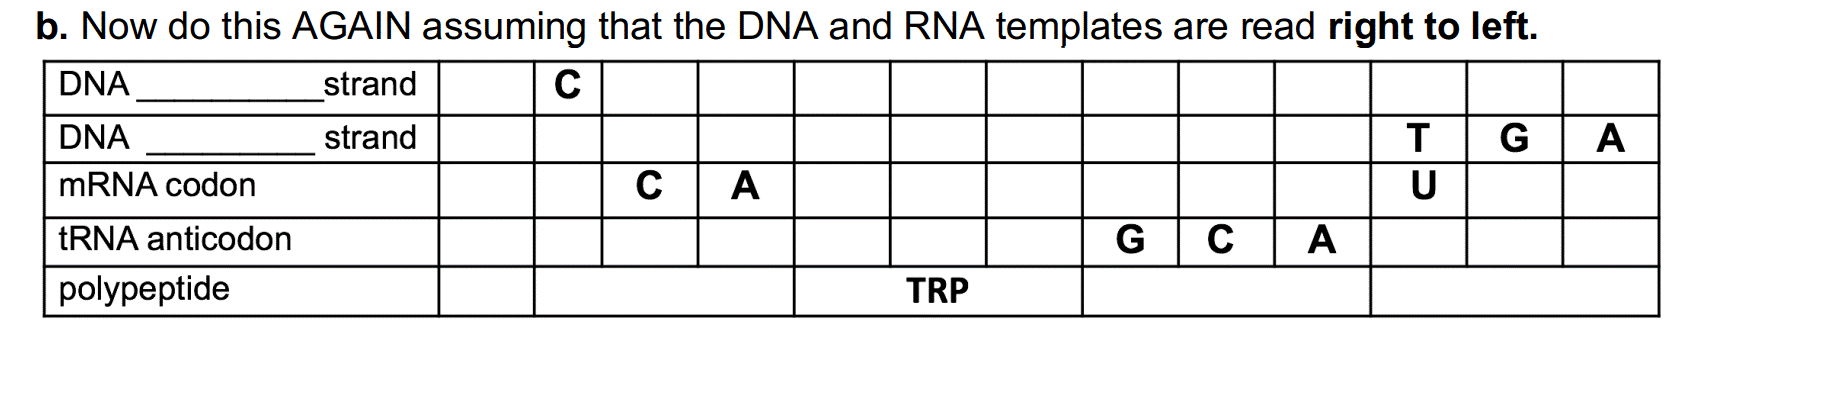 b. Now do this AGAIN assuming that the DNA and RNA templates are read right to left.
DNA
strand
C
DNA
strand
T
G
A
MRNA codon
C|A
U
TRNA anticodon
G
A
polypeptide
TRP
